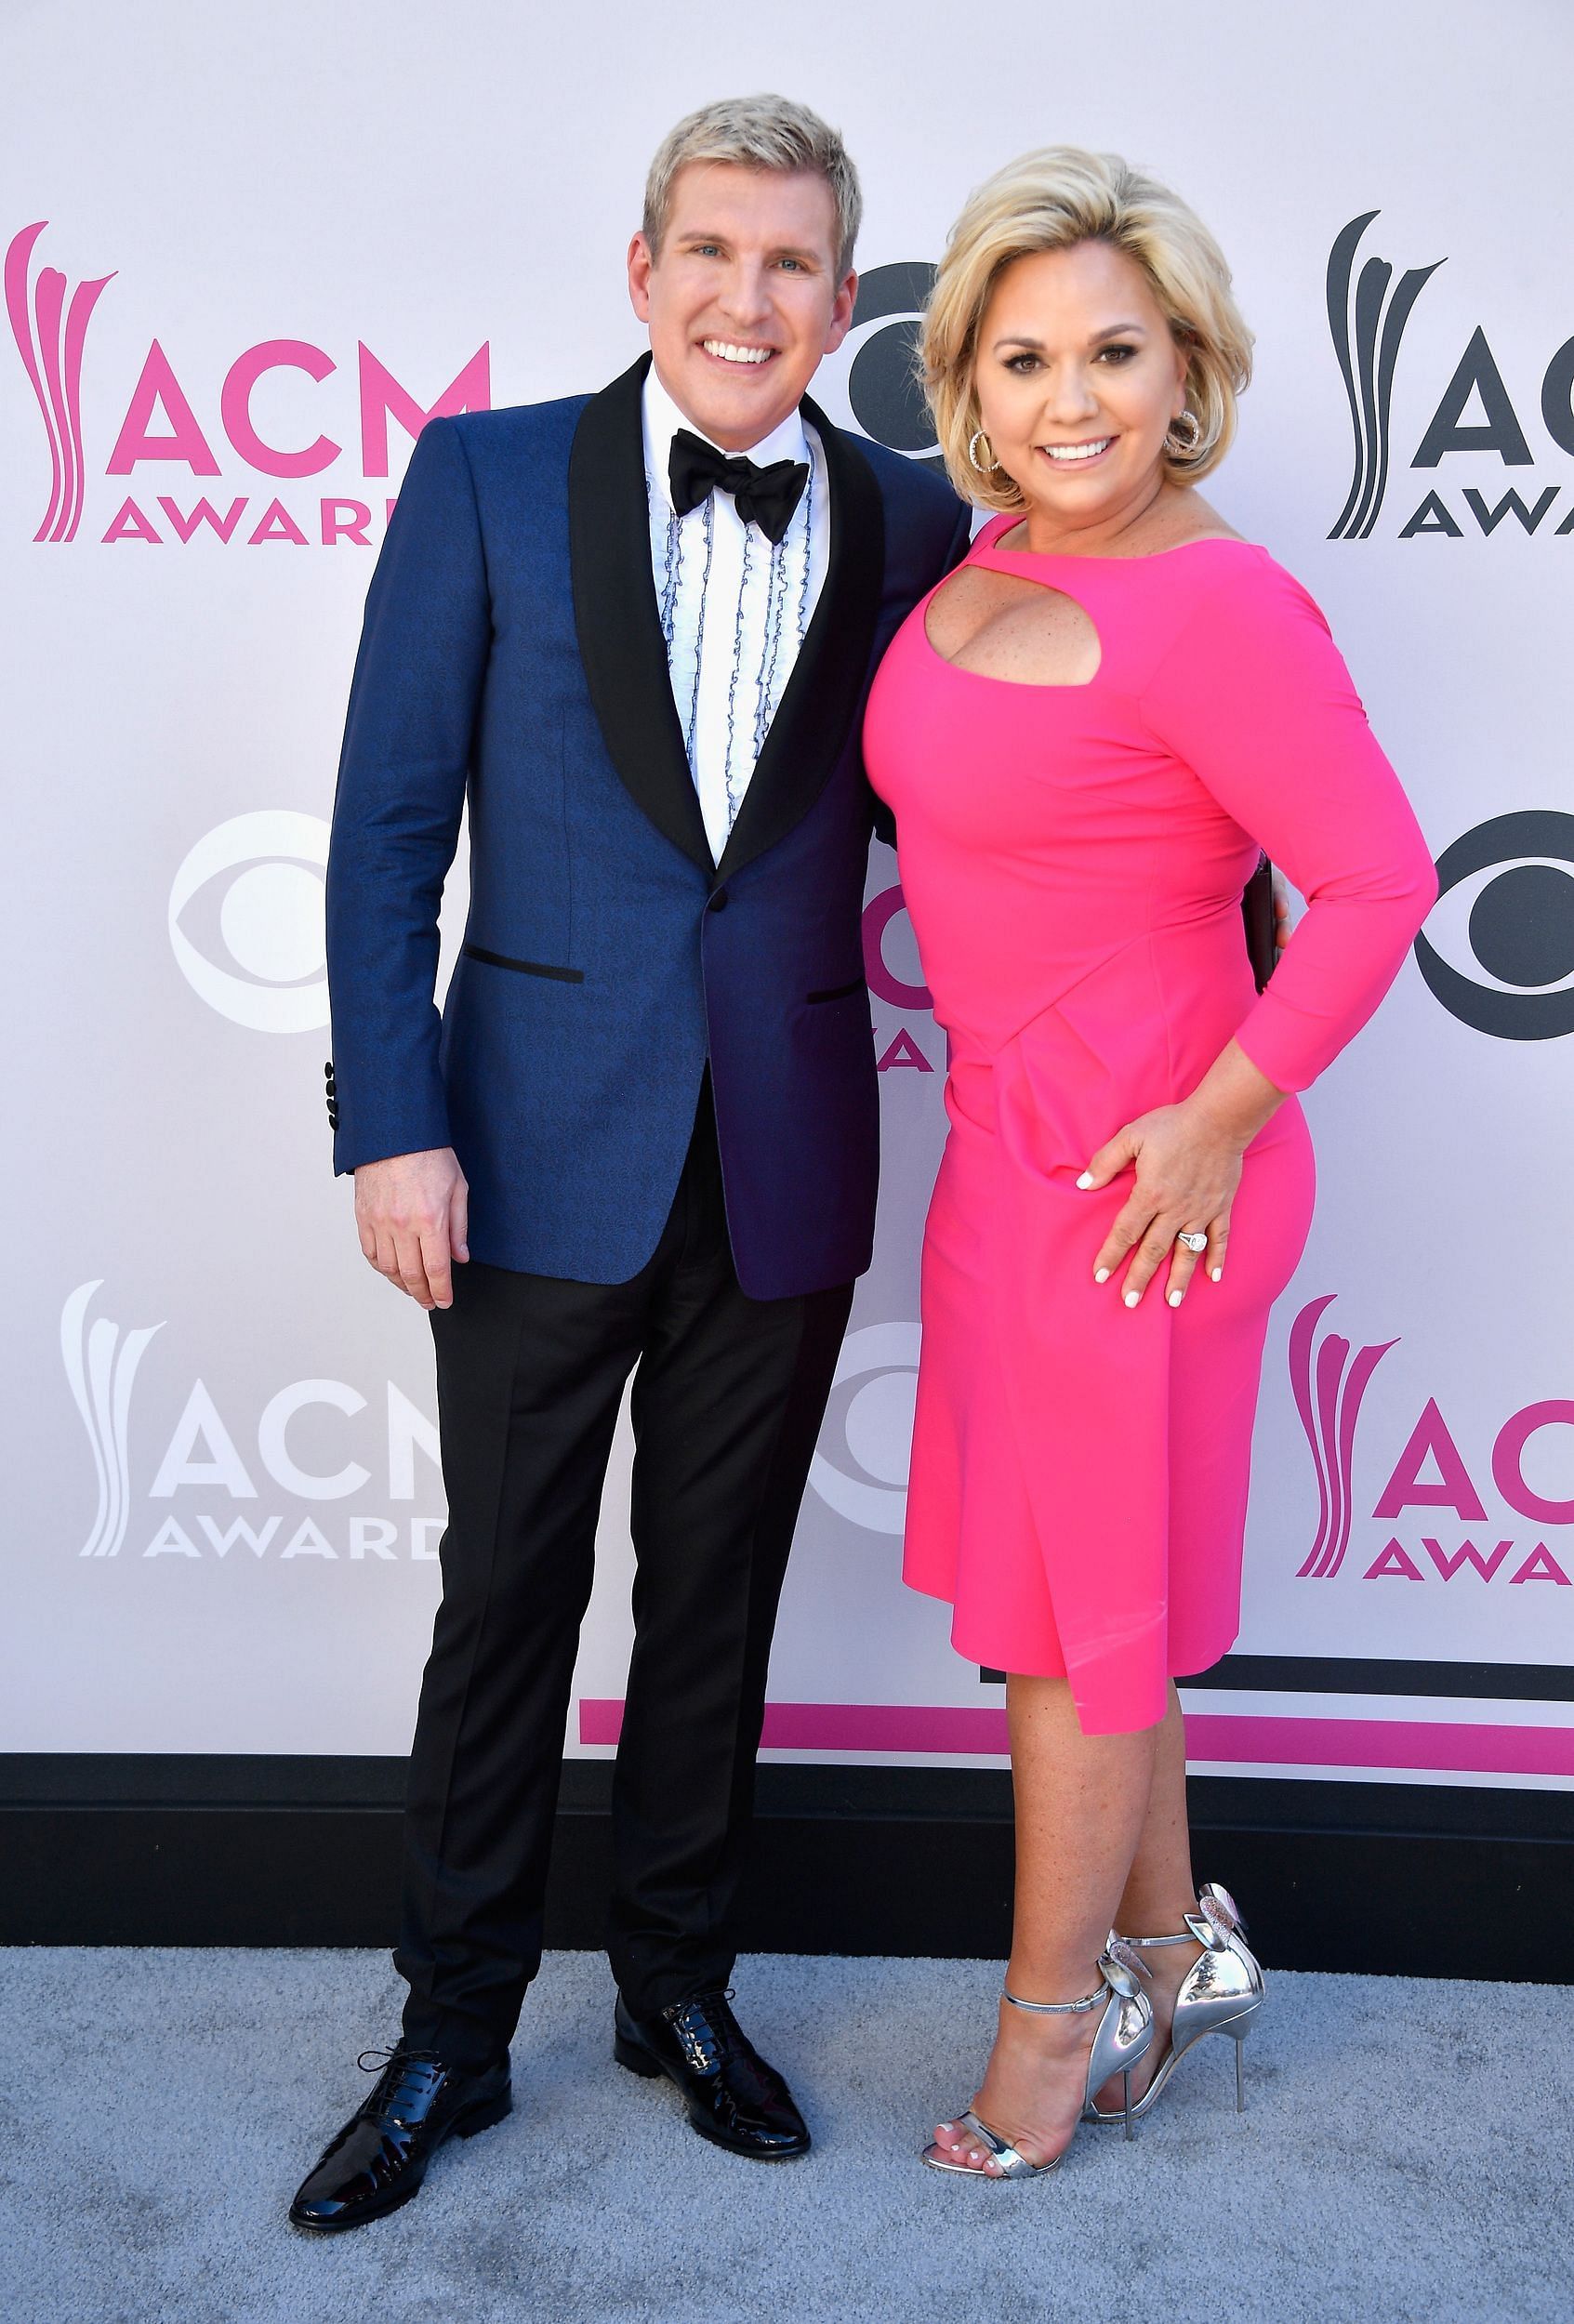 Todd Chrisley with wife, Julie Chrisley at 52nd Academy of Country Music Awards (Image via Getty)